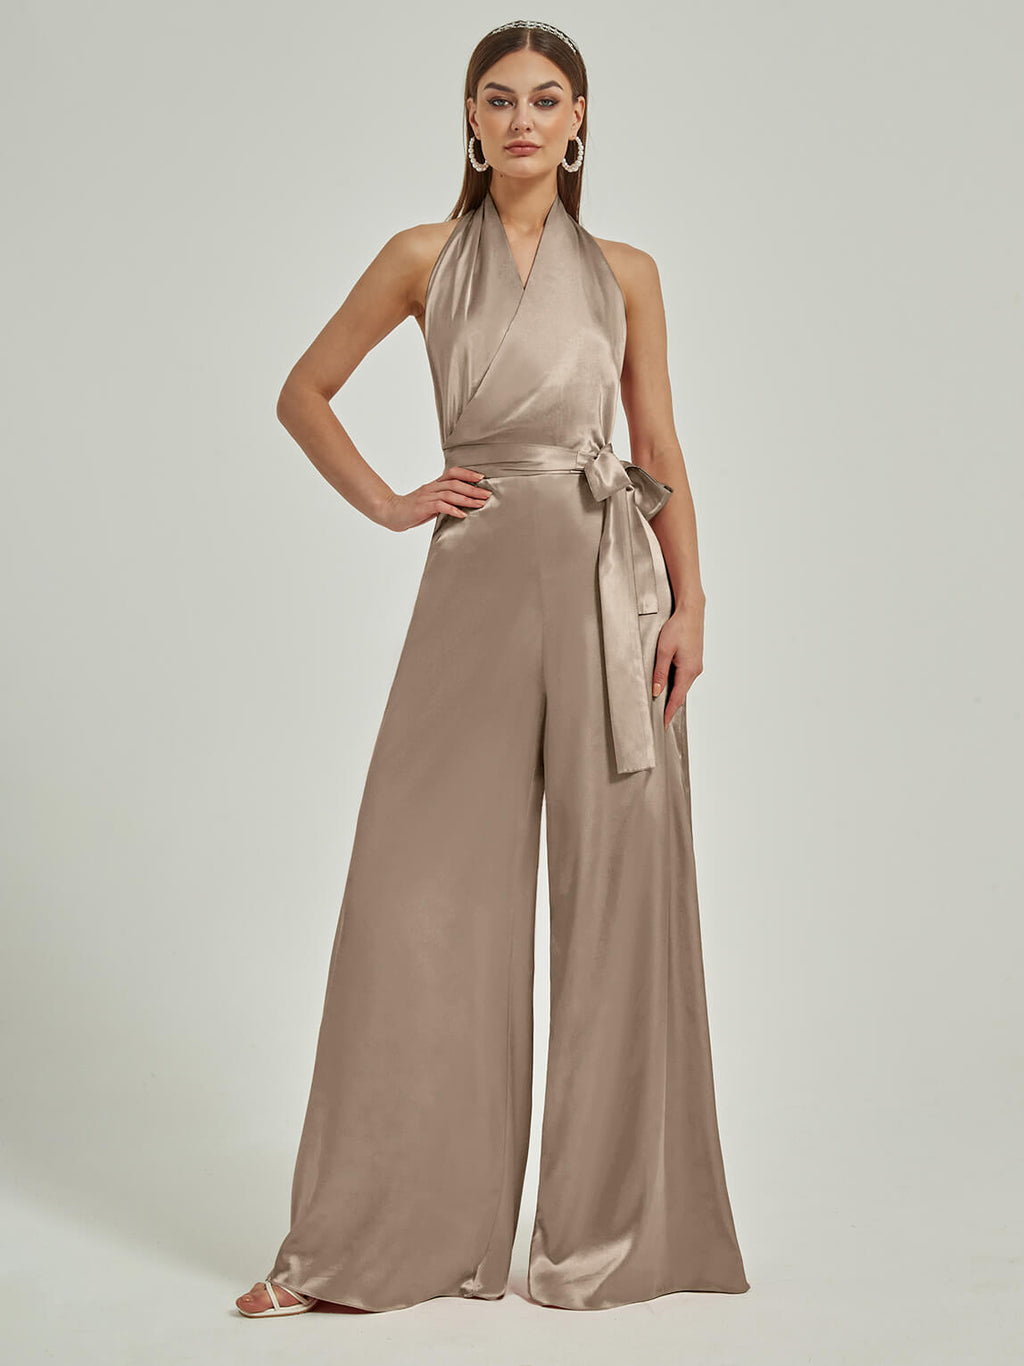 NZ Bridal Taupe Halter Jumpsuit Satin Rompers EB30S19 Poppy a